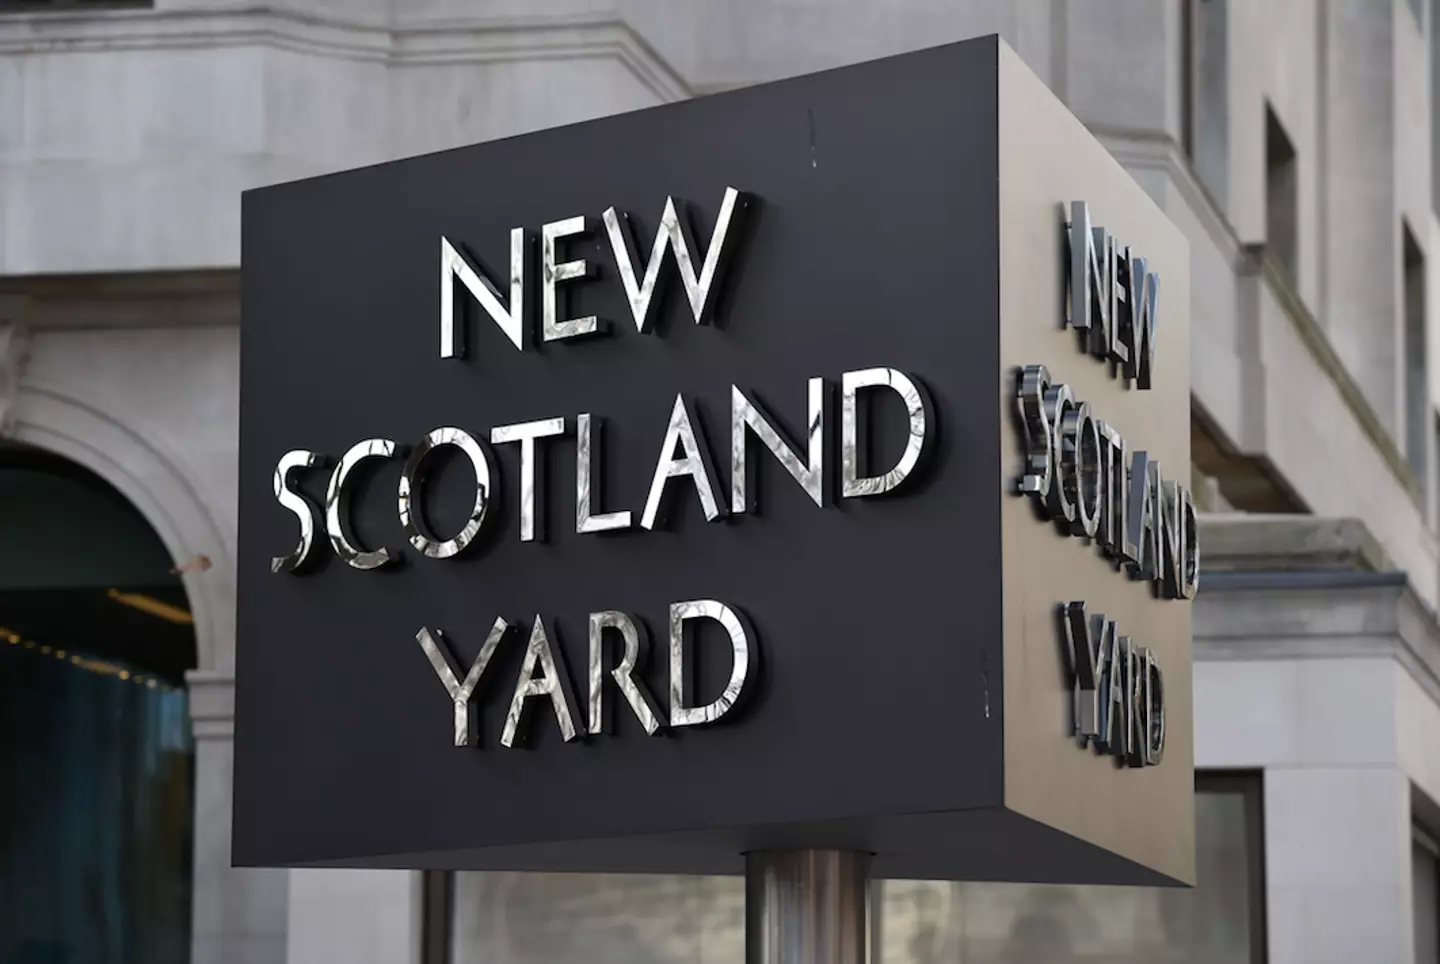 The Met Police have since dismissed Wayne Couzens without notice (